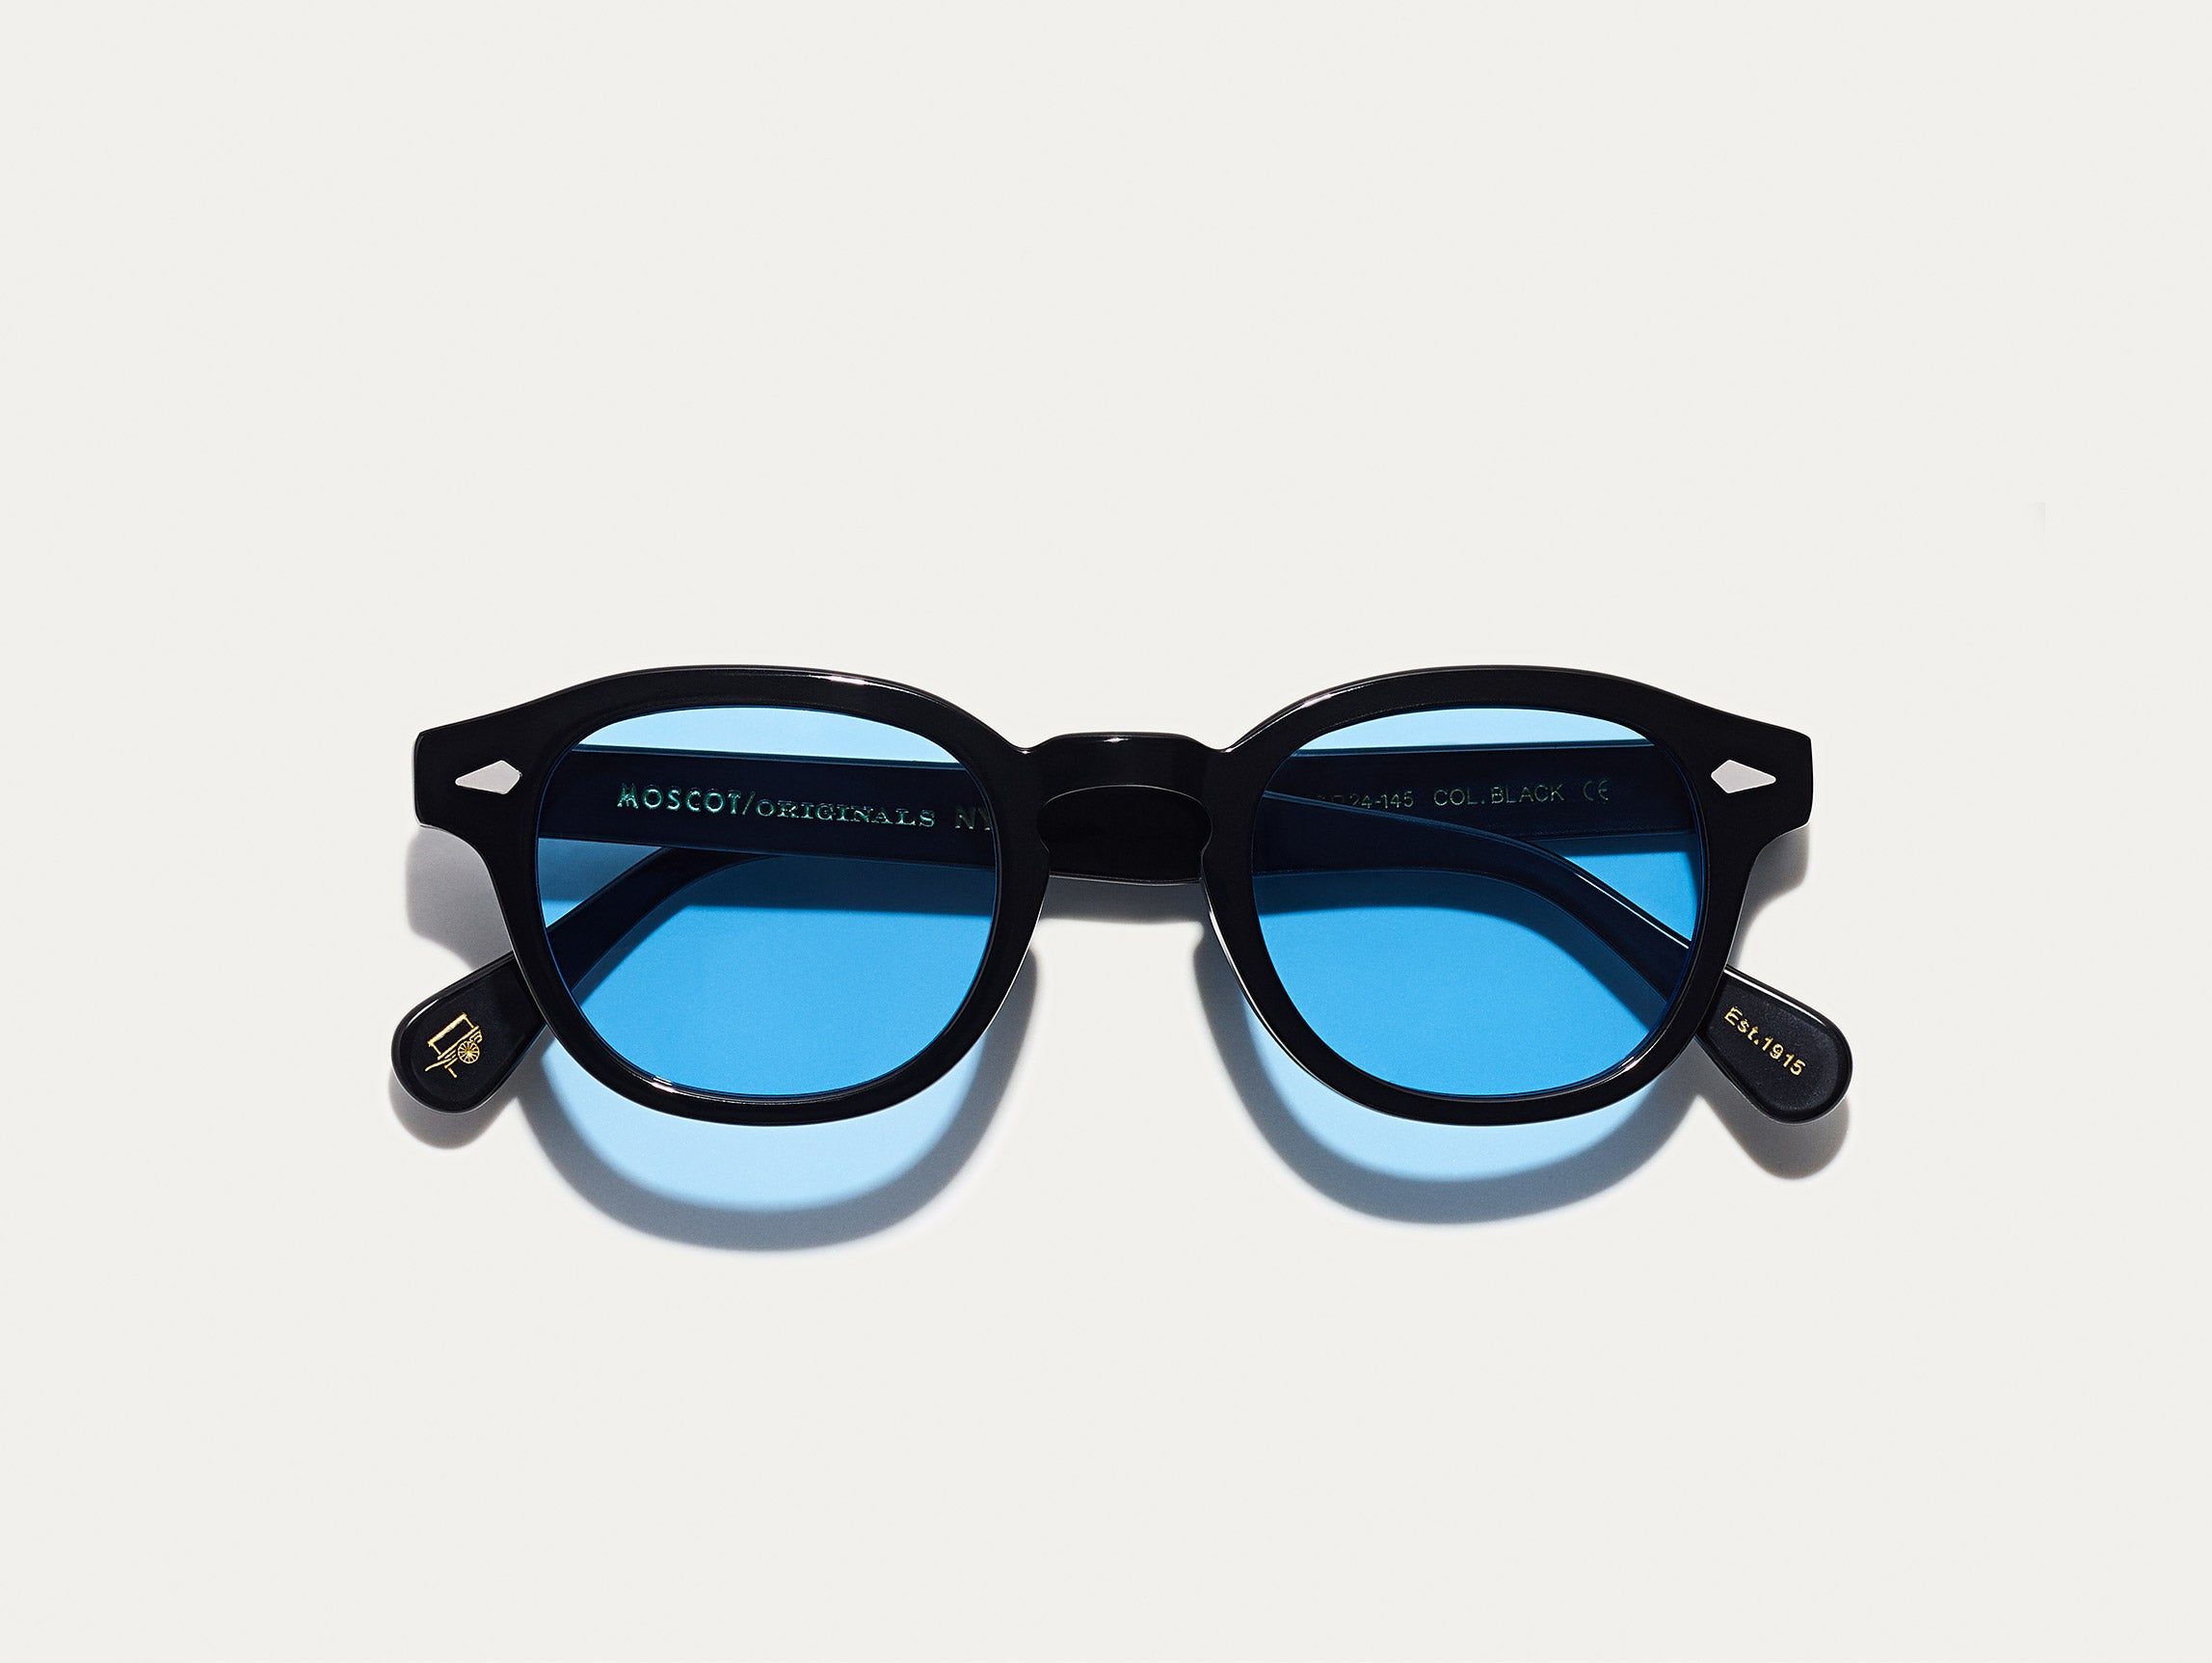 The LEMTOSH Black with Celebrity Blue Tinted Lenses